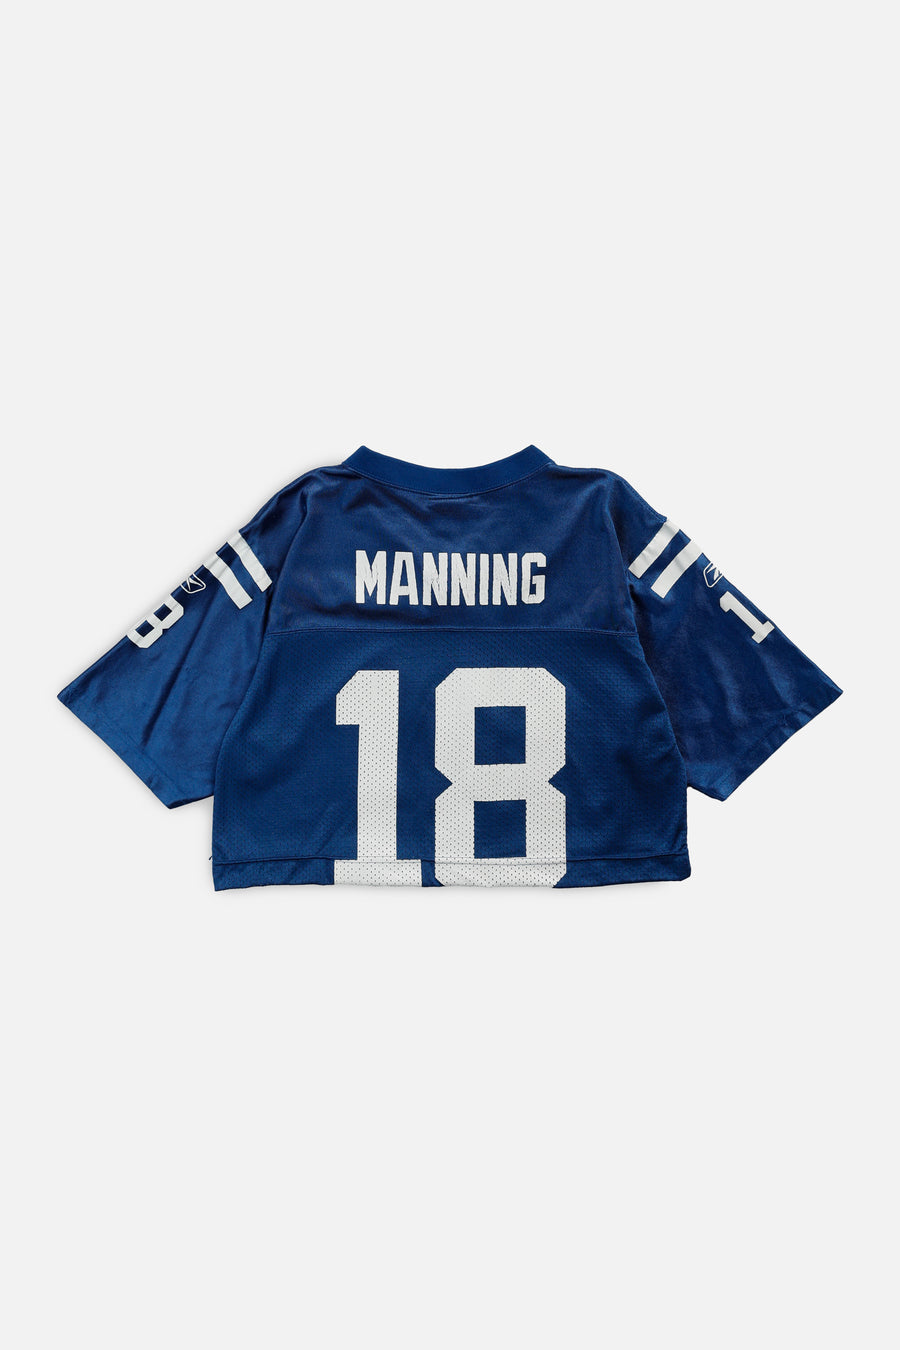 Rework Crop Indianapolis Colts NFL Jersey - XS